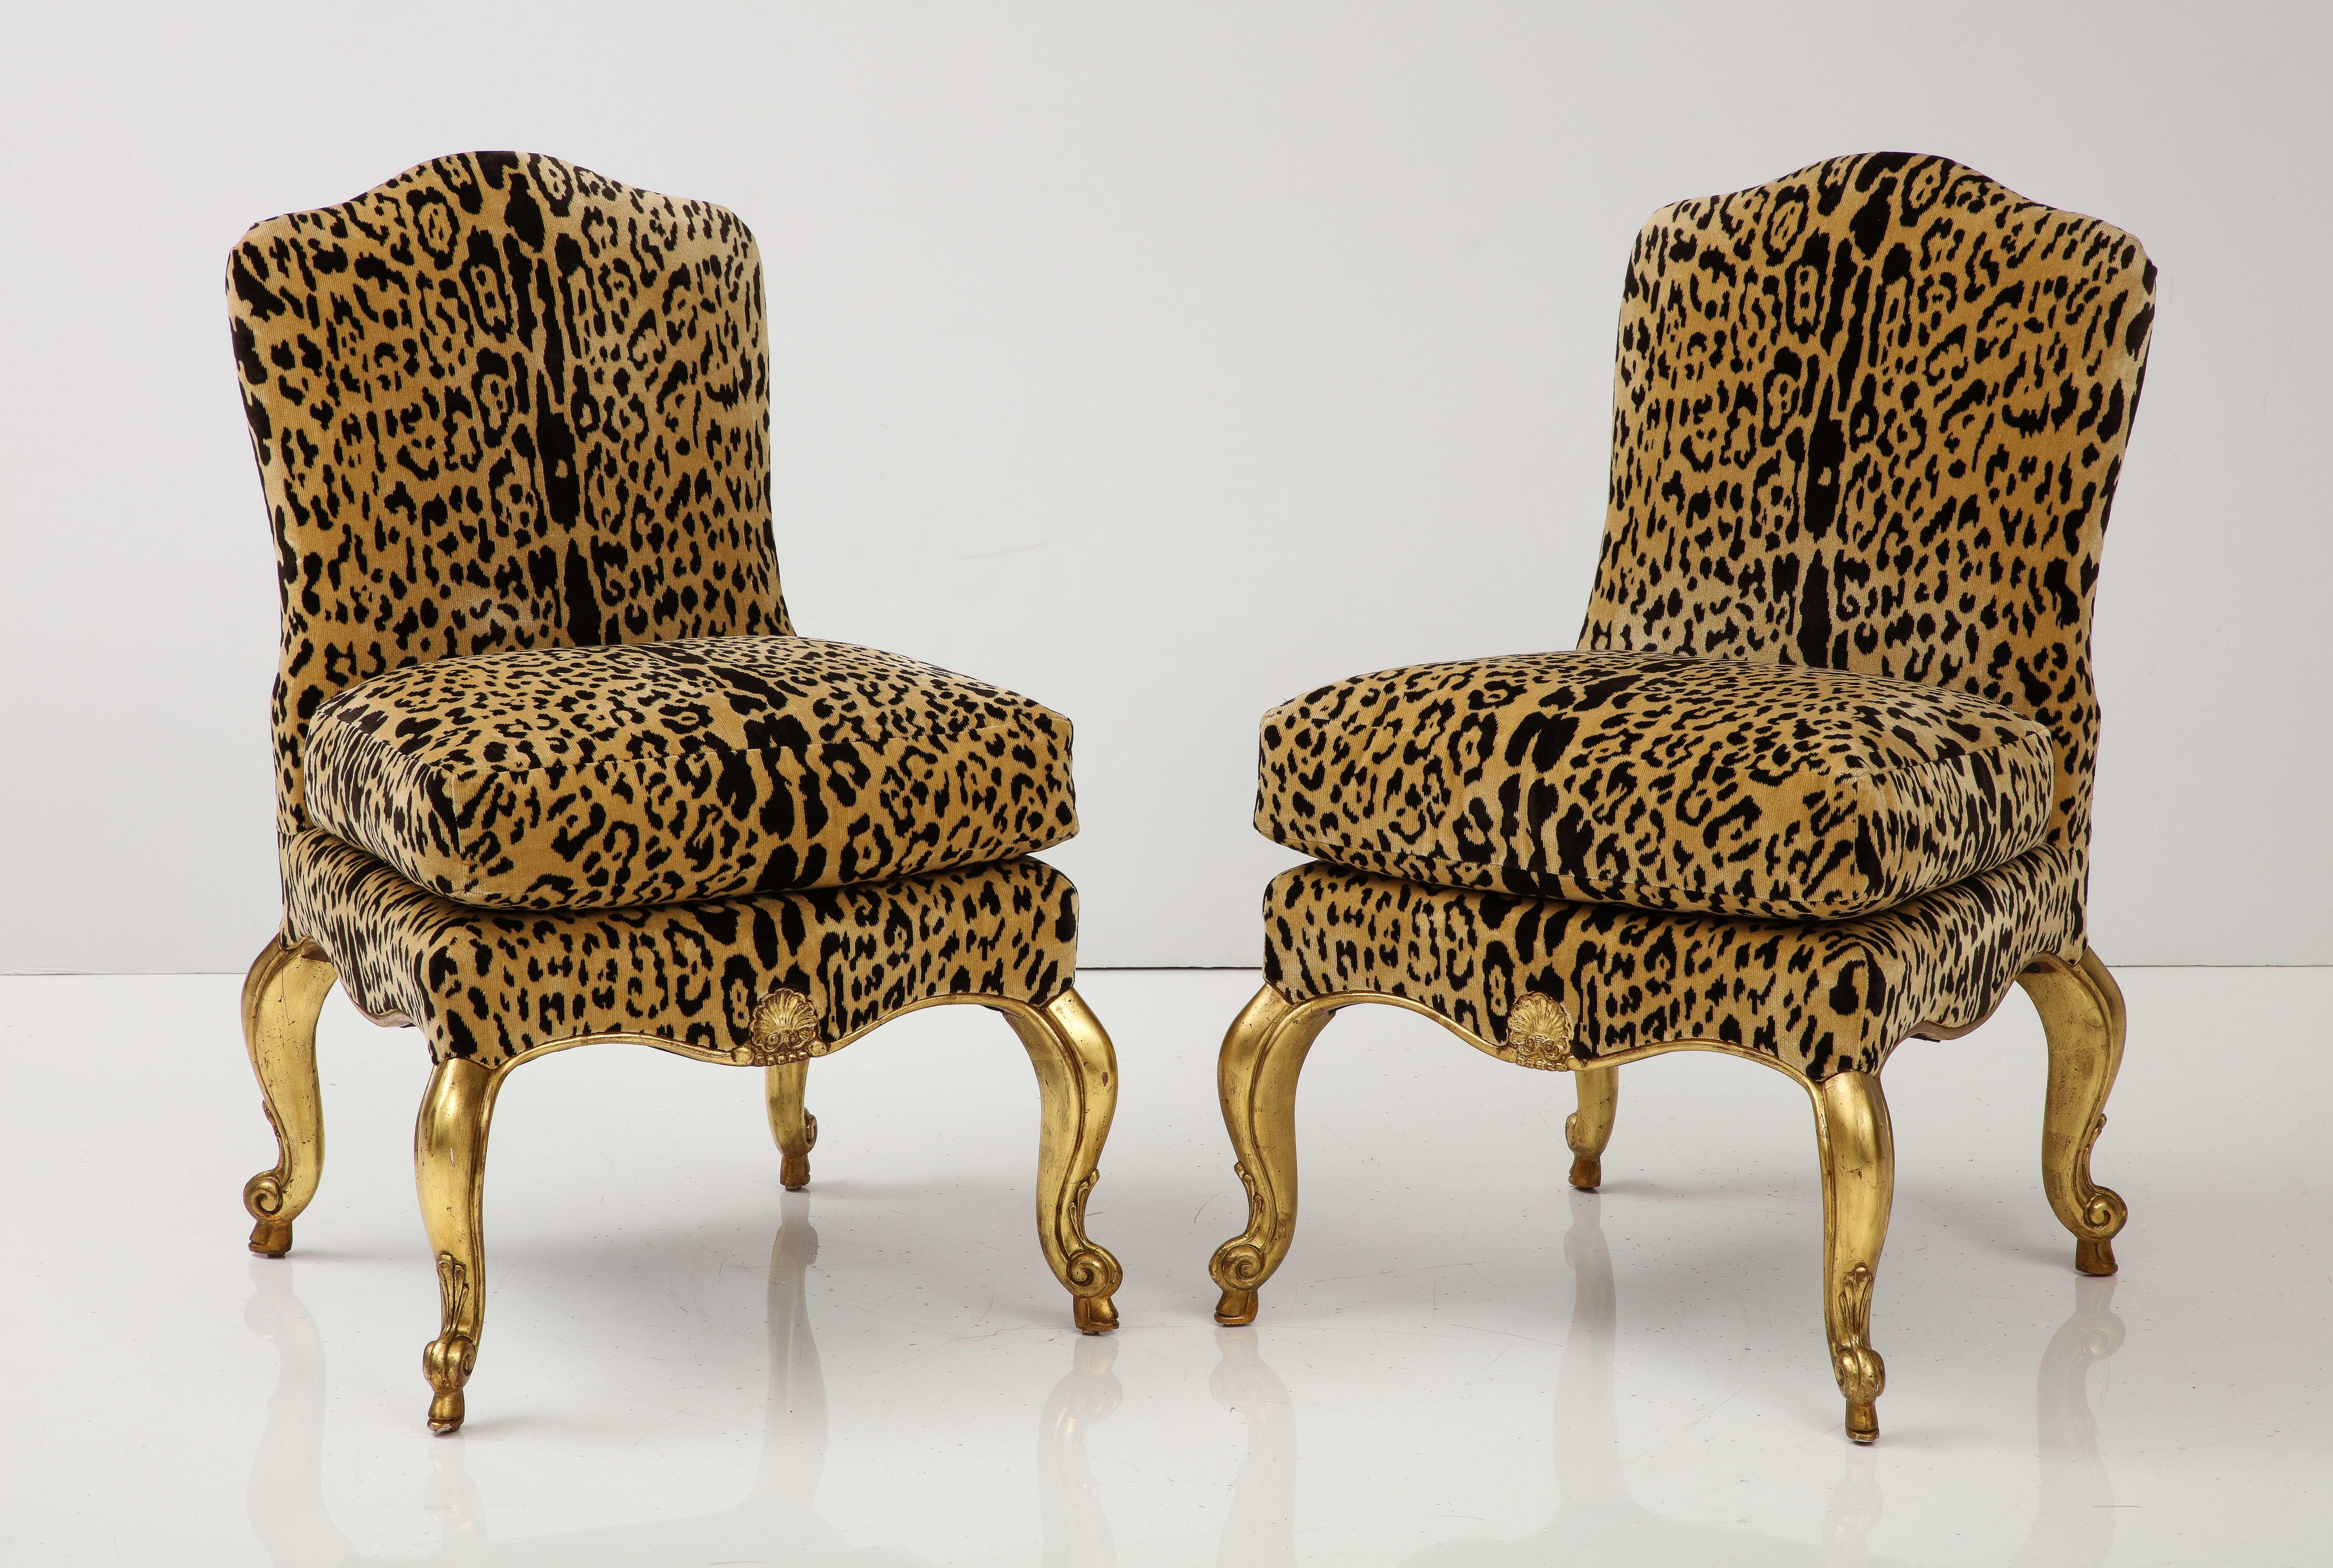 20th Century Pair of Leopard and Gold Slipper Chairs